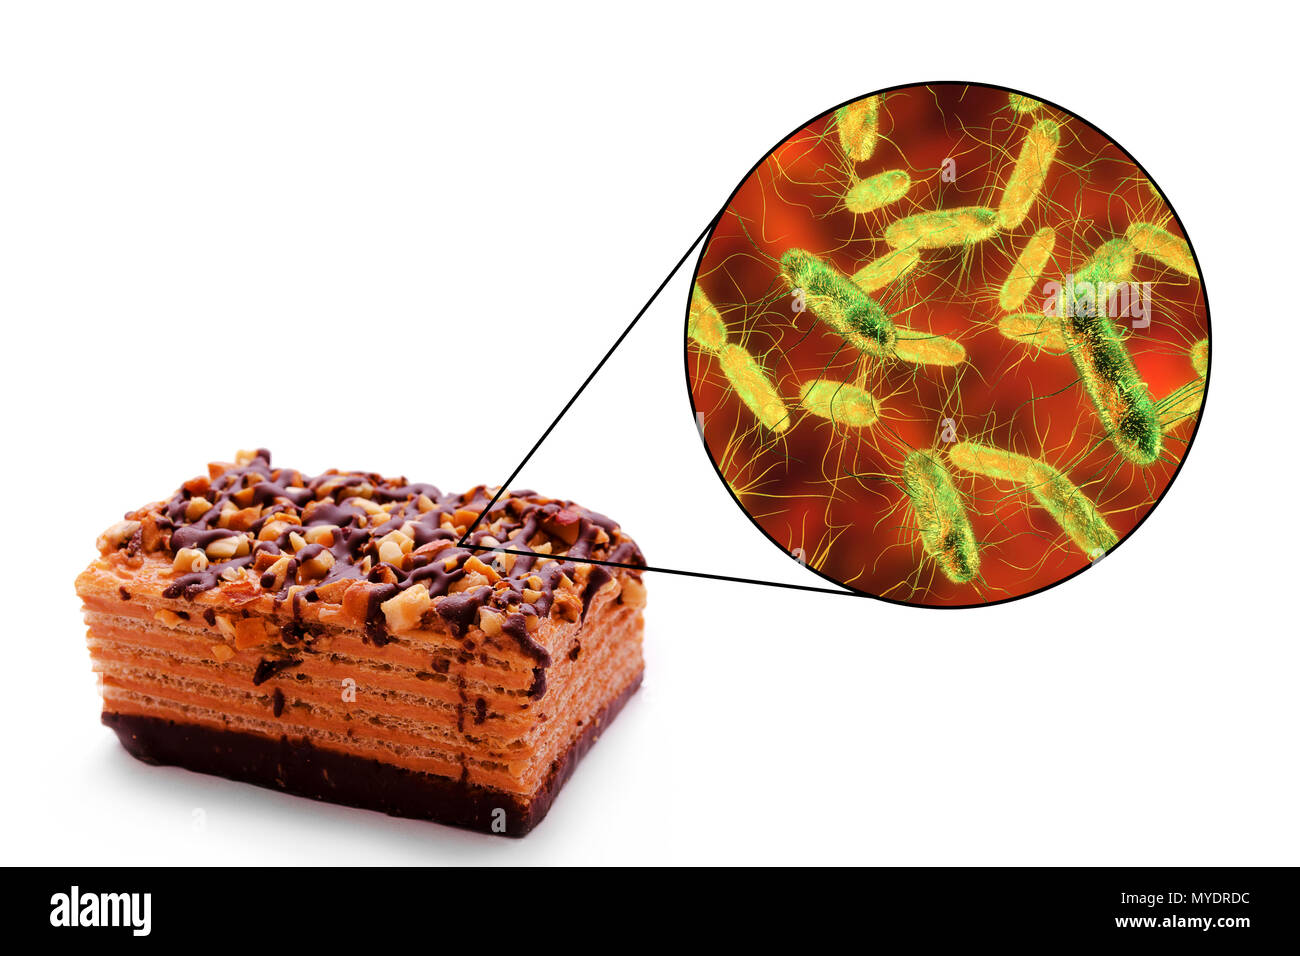 Food poisoning caused by Salmonella bacteria, conceptual illustration. Several Salmonella species cause human food poisoning (salmonellosis) when contaminated food such as meat, milk and eggs, is eaten. Symptoms include abdominal pain, nausea, vomiting and diarrhoea. The infection is treated by rehydration therapy, although antibiotics must be taken if the bacteria have spread into the bloodstream. Stock Photo